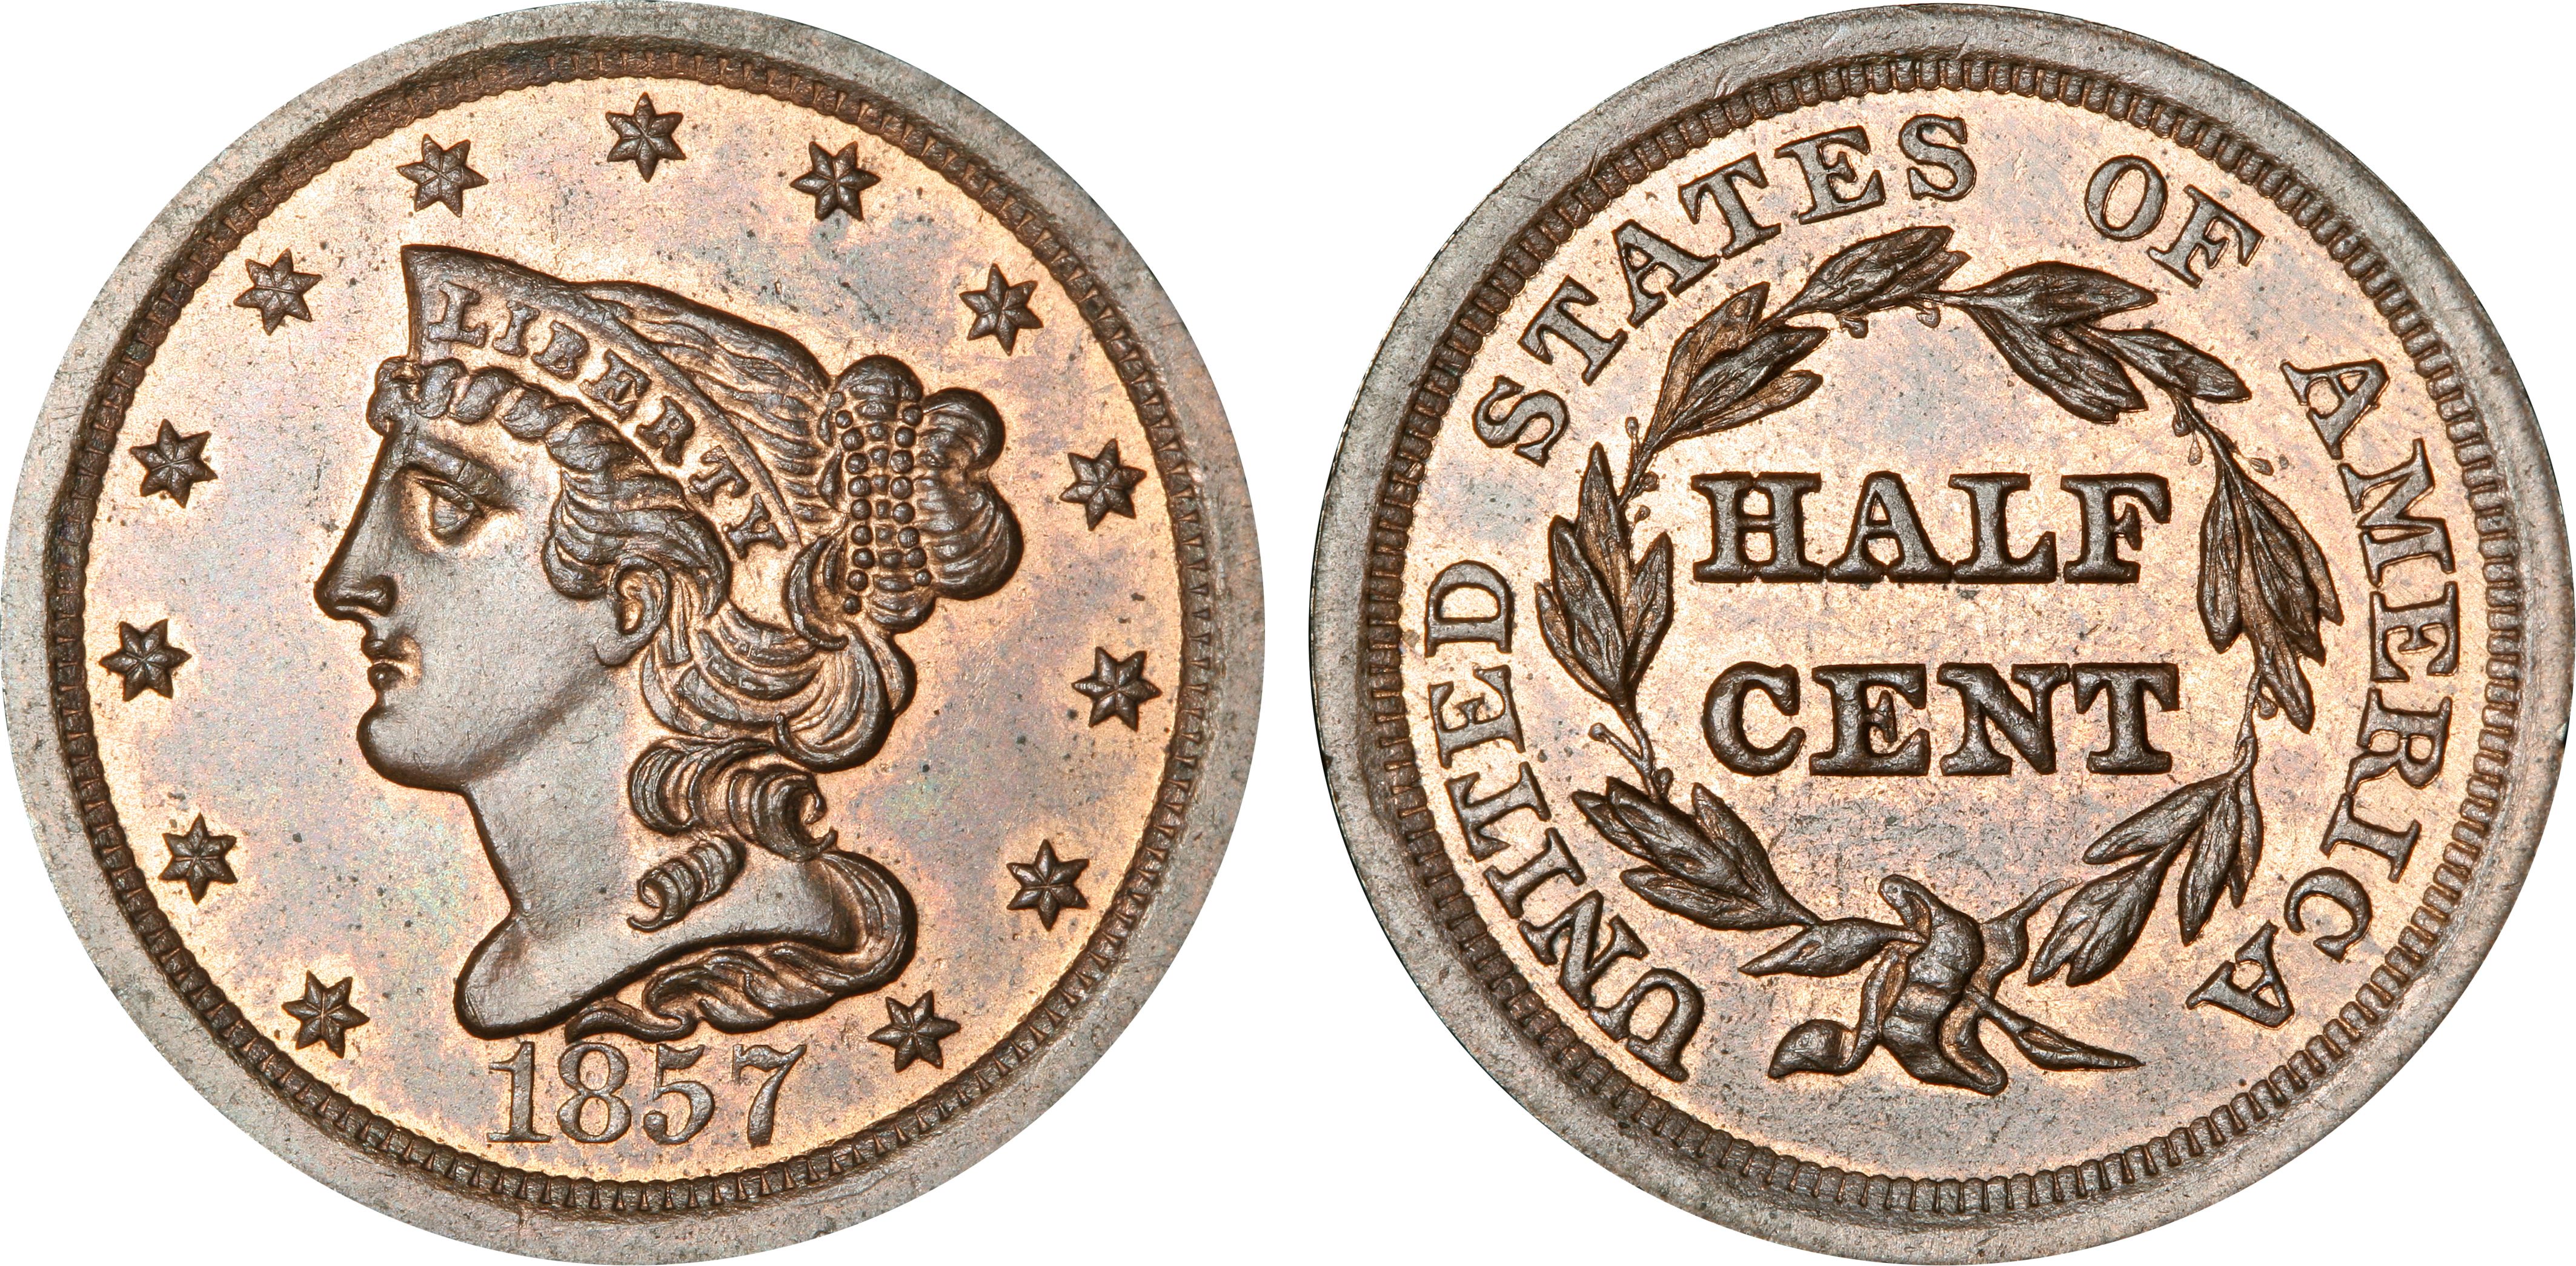 1851 1/2C Cohen 1, RB (Regular Strike) Braided Hair Half Cent - PCGS  CoinFacts